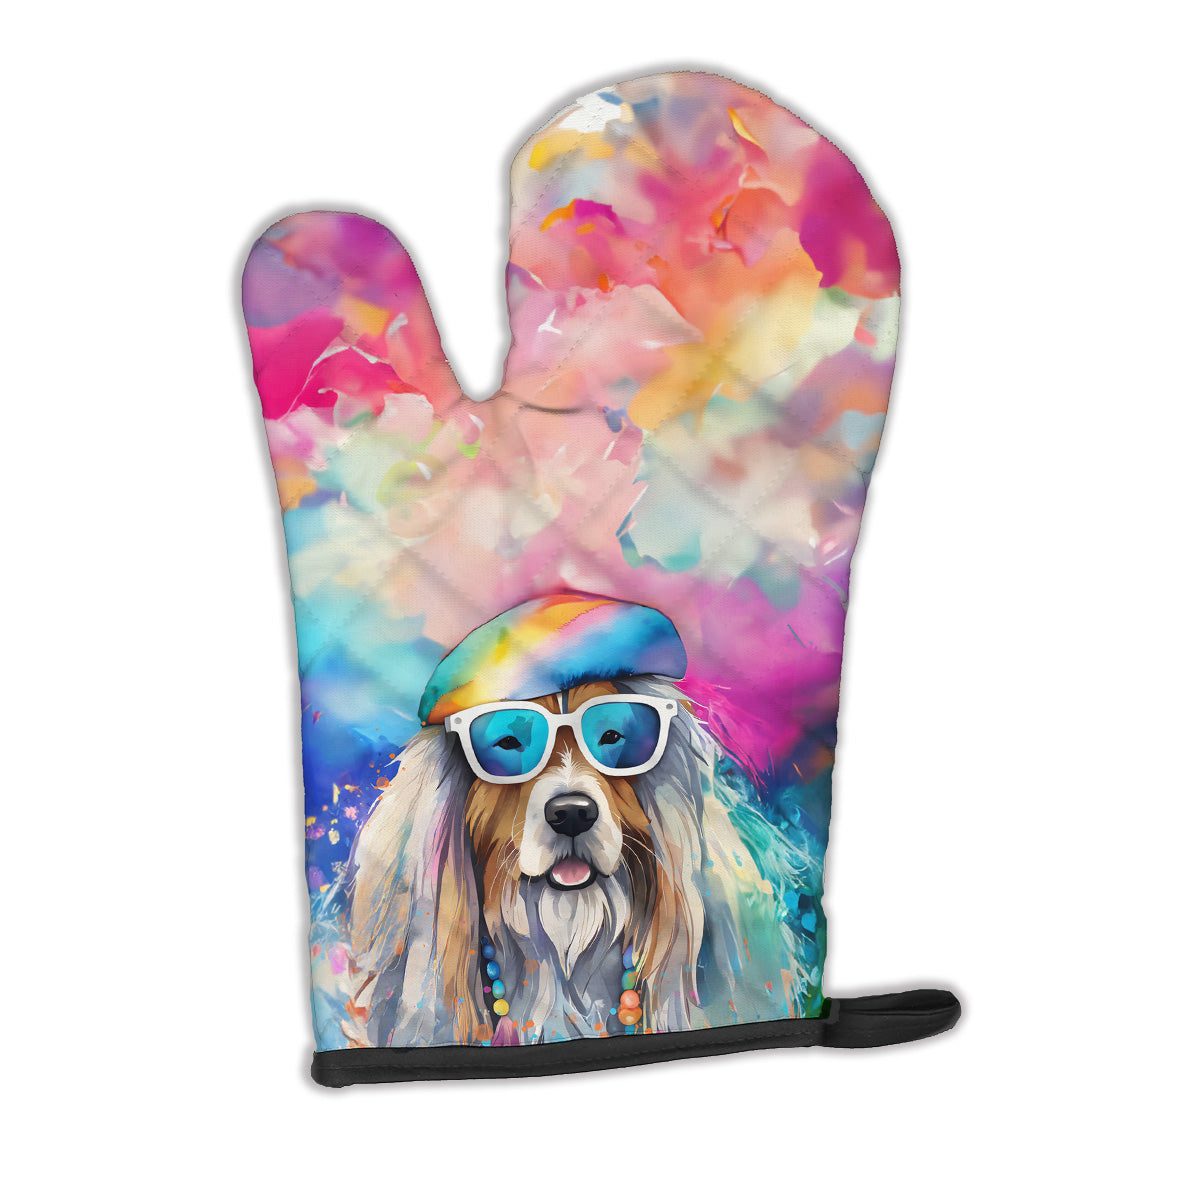 Buy this Bearded Collie Hippie Dawg Oven Mitt